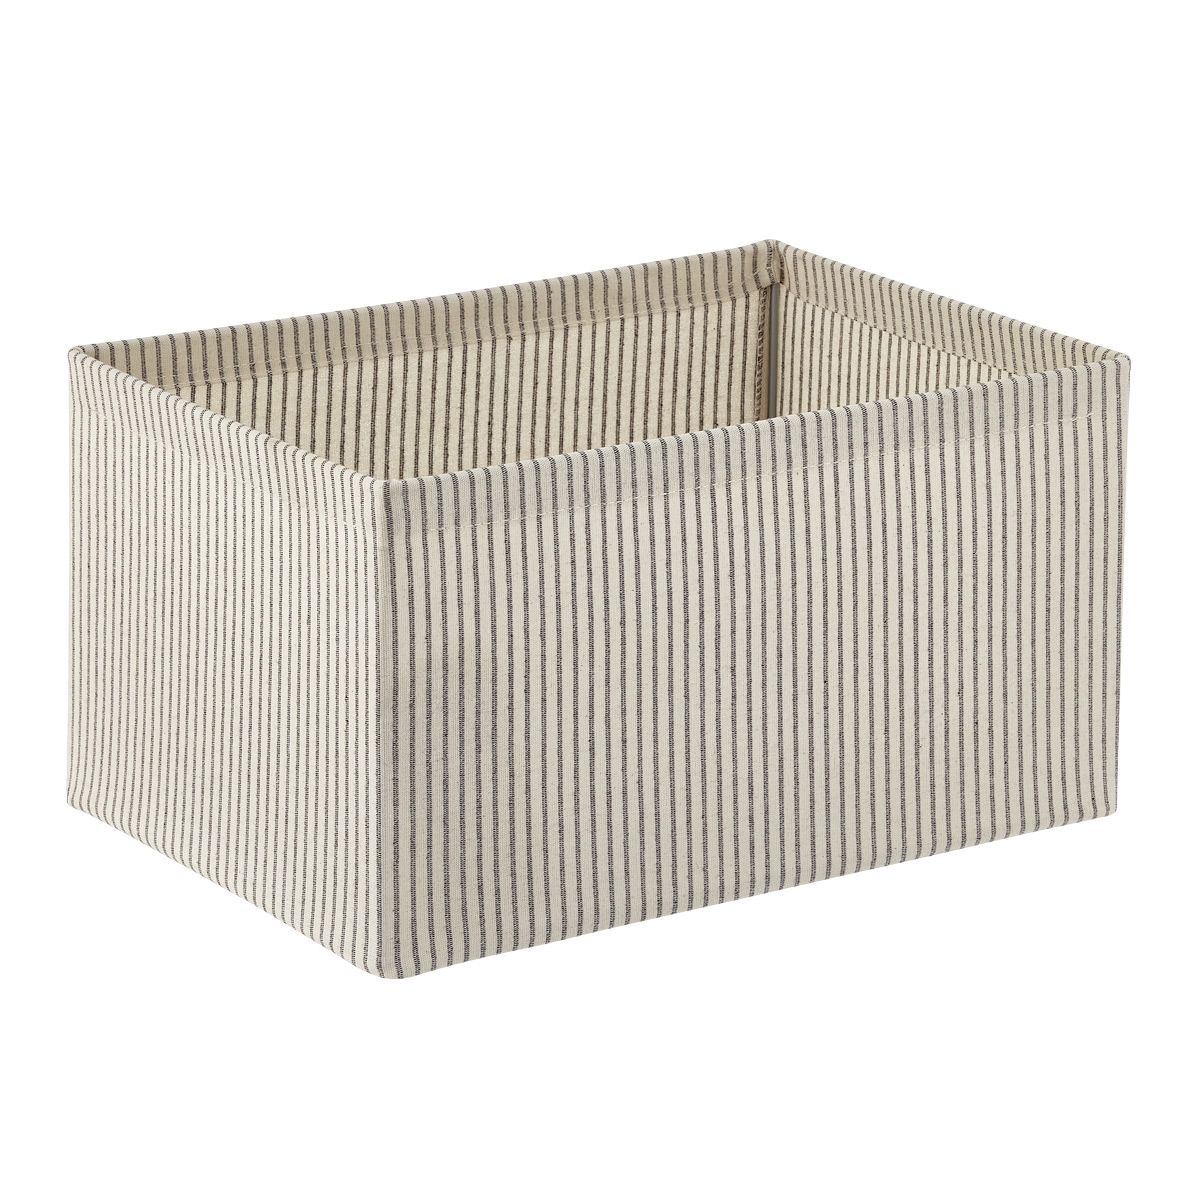 The Container Store Open Canvas Bin Grey Stripe | The Container Store